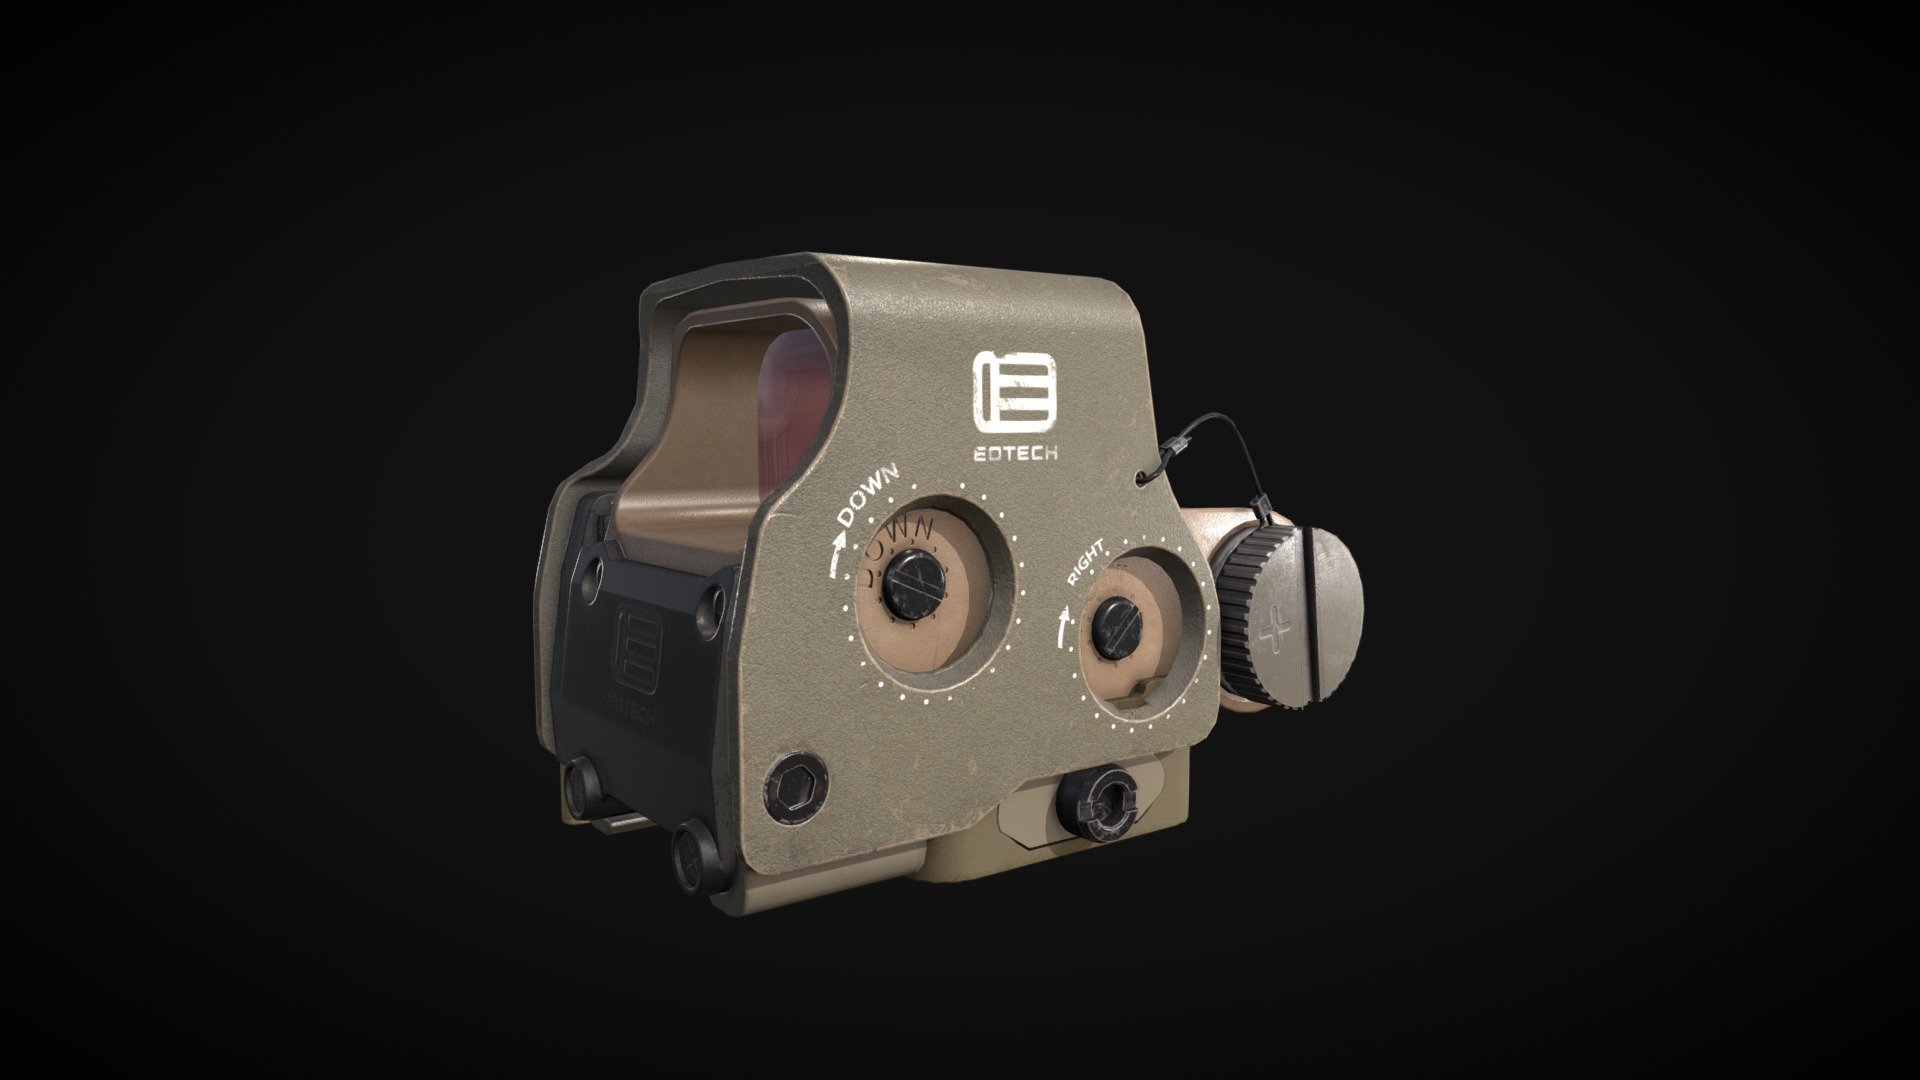 A game-ready Tactical EOTech EXPS3-0 TAN Holographic Weapon Sight - EOTech EXPS3-0 Tactical Holographic Weapon Sight - 3D model by niels_couvreur 3d model